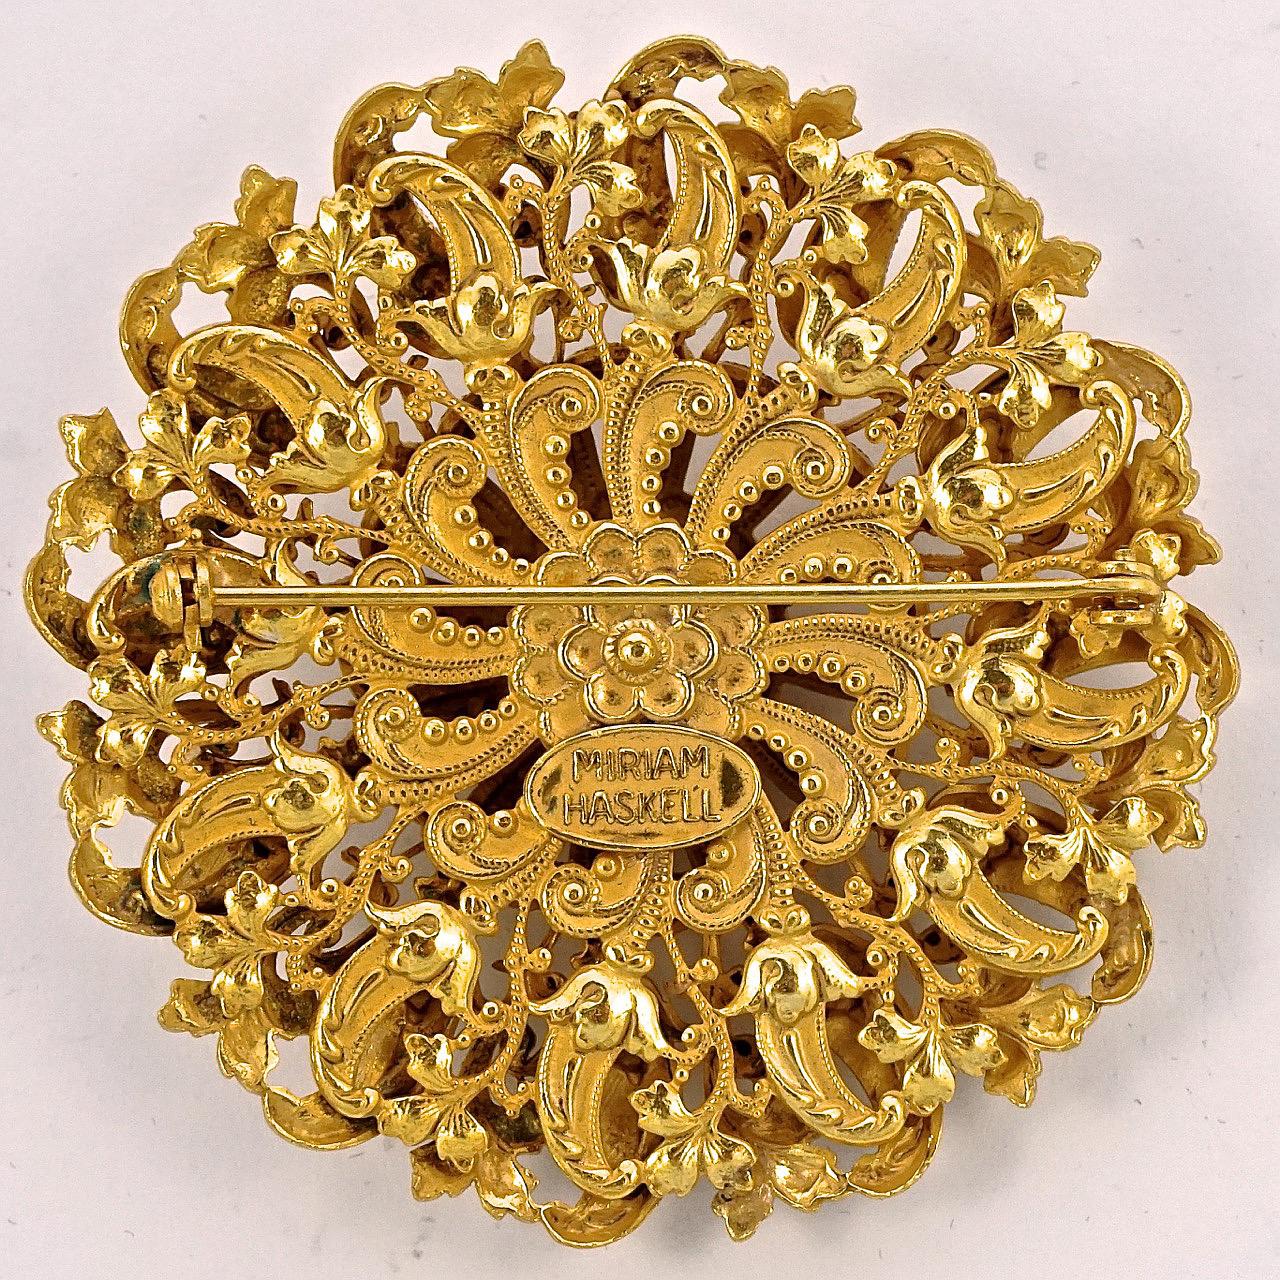 Miriam Haskell beautiful Russian gold plated dome brooch, with a lovely ornate flower and leaf design. Measuring diameter 5.9 cm / 2.3 inches. The brooch is in very good condition.

This is a wonderful intricate brooch with the Haskell Russian gold